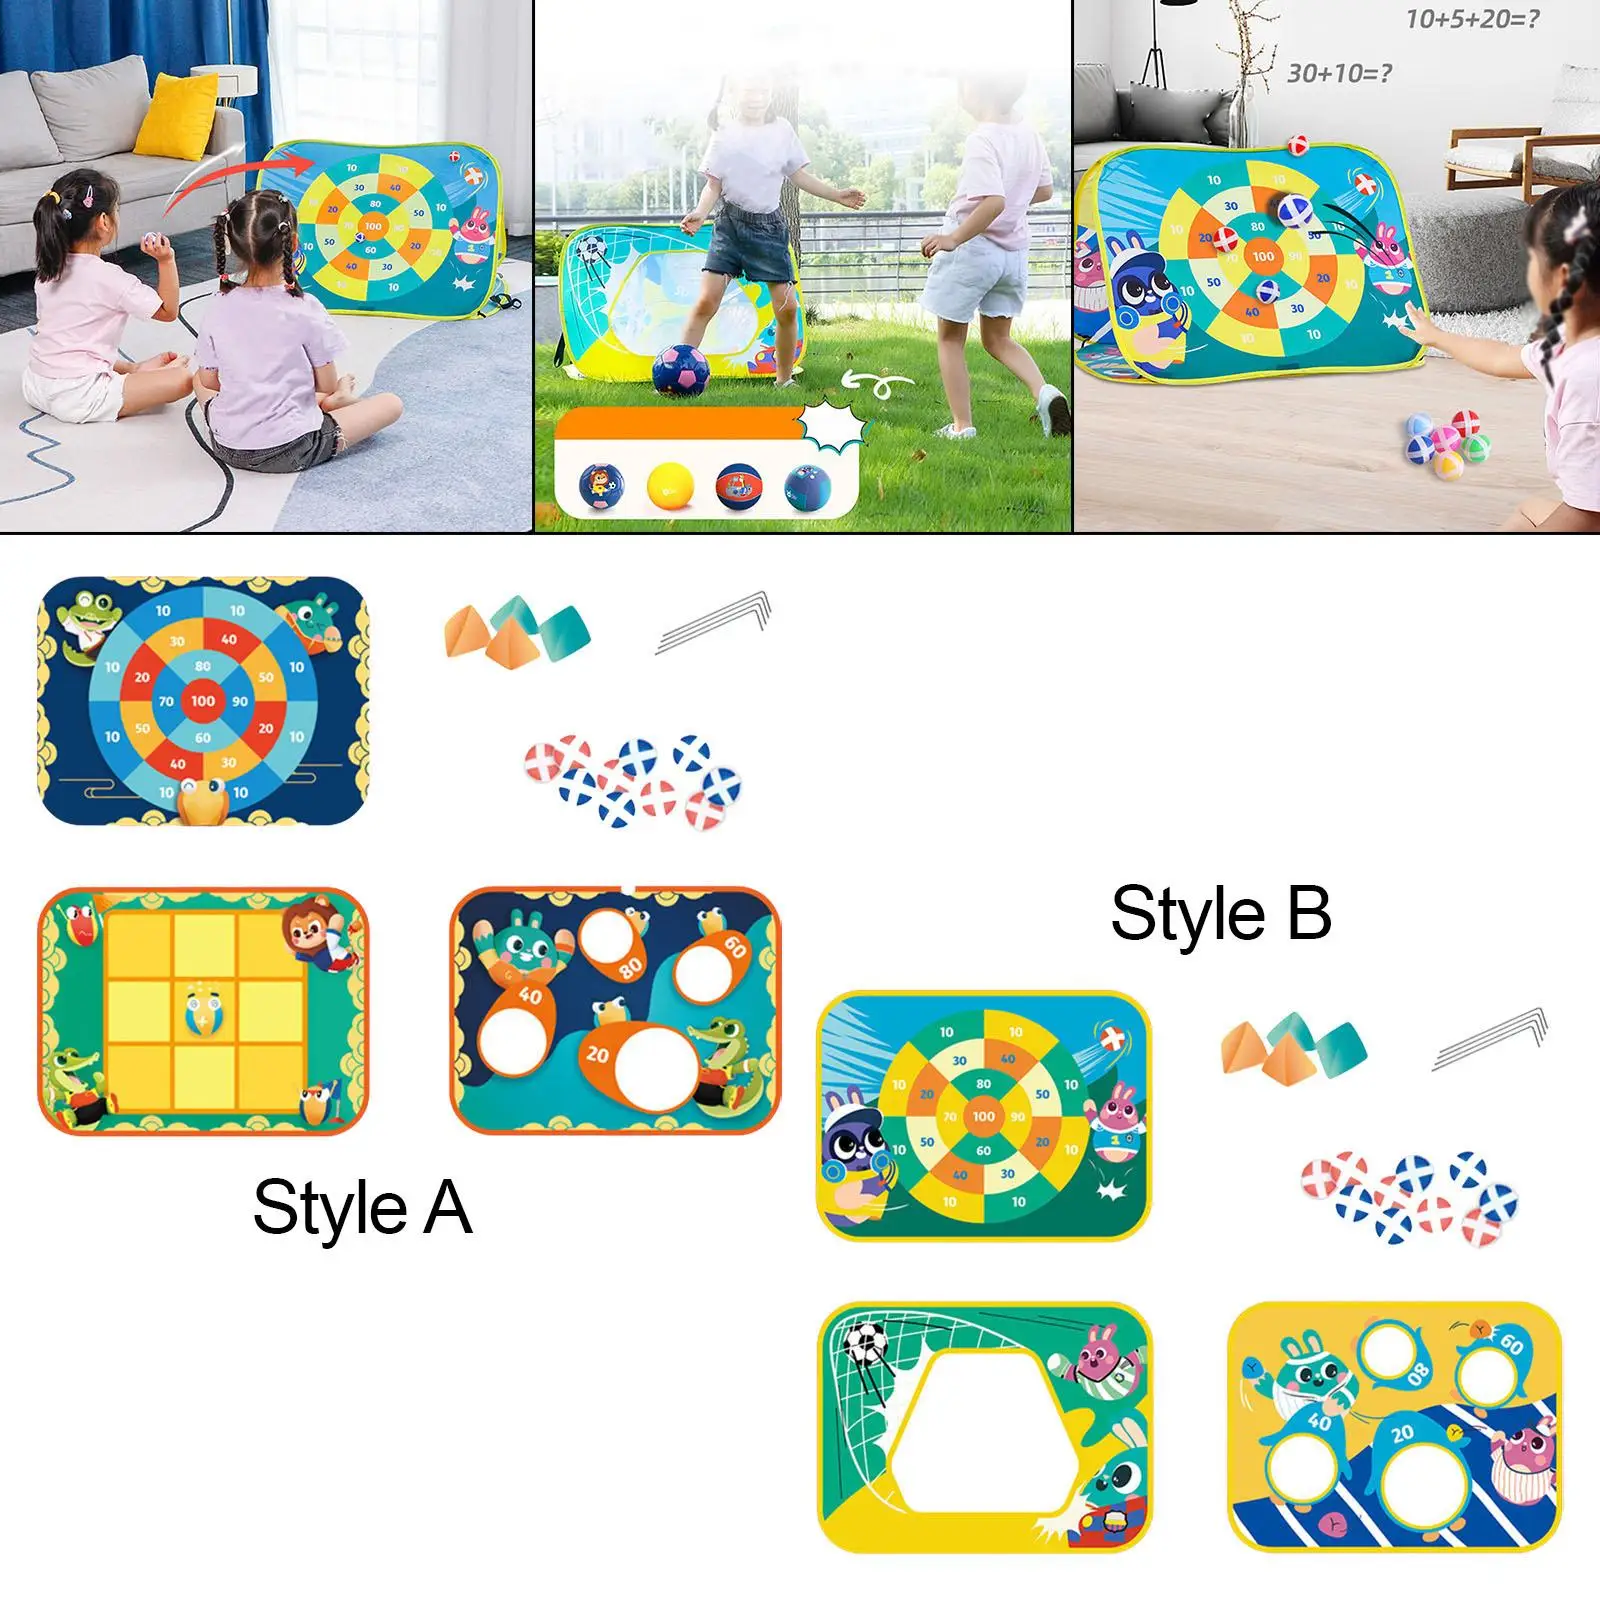 Sticky Ball Toss Educational Board Games Portable for Game Outside Training